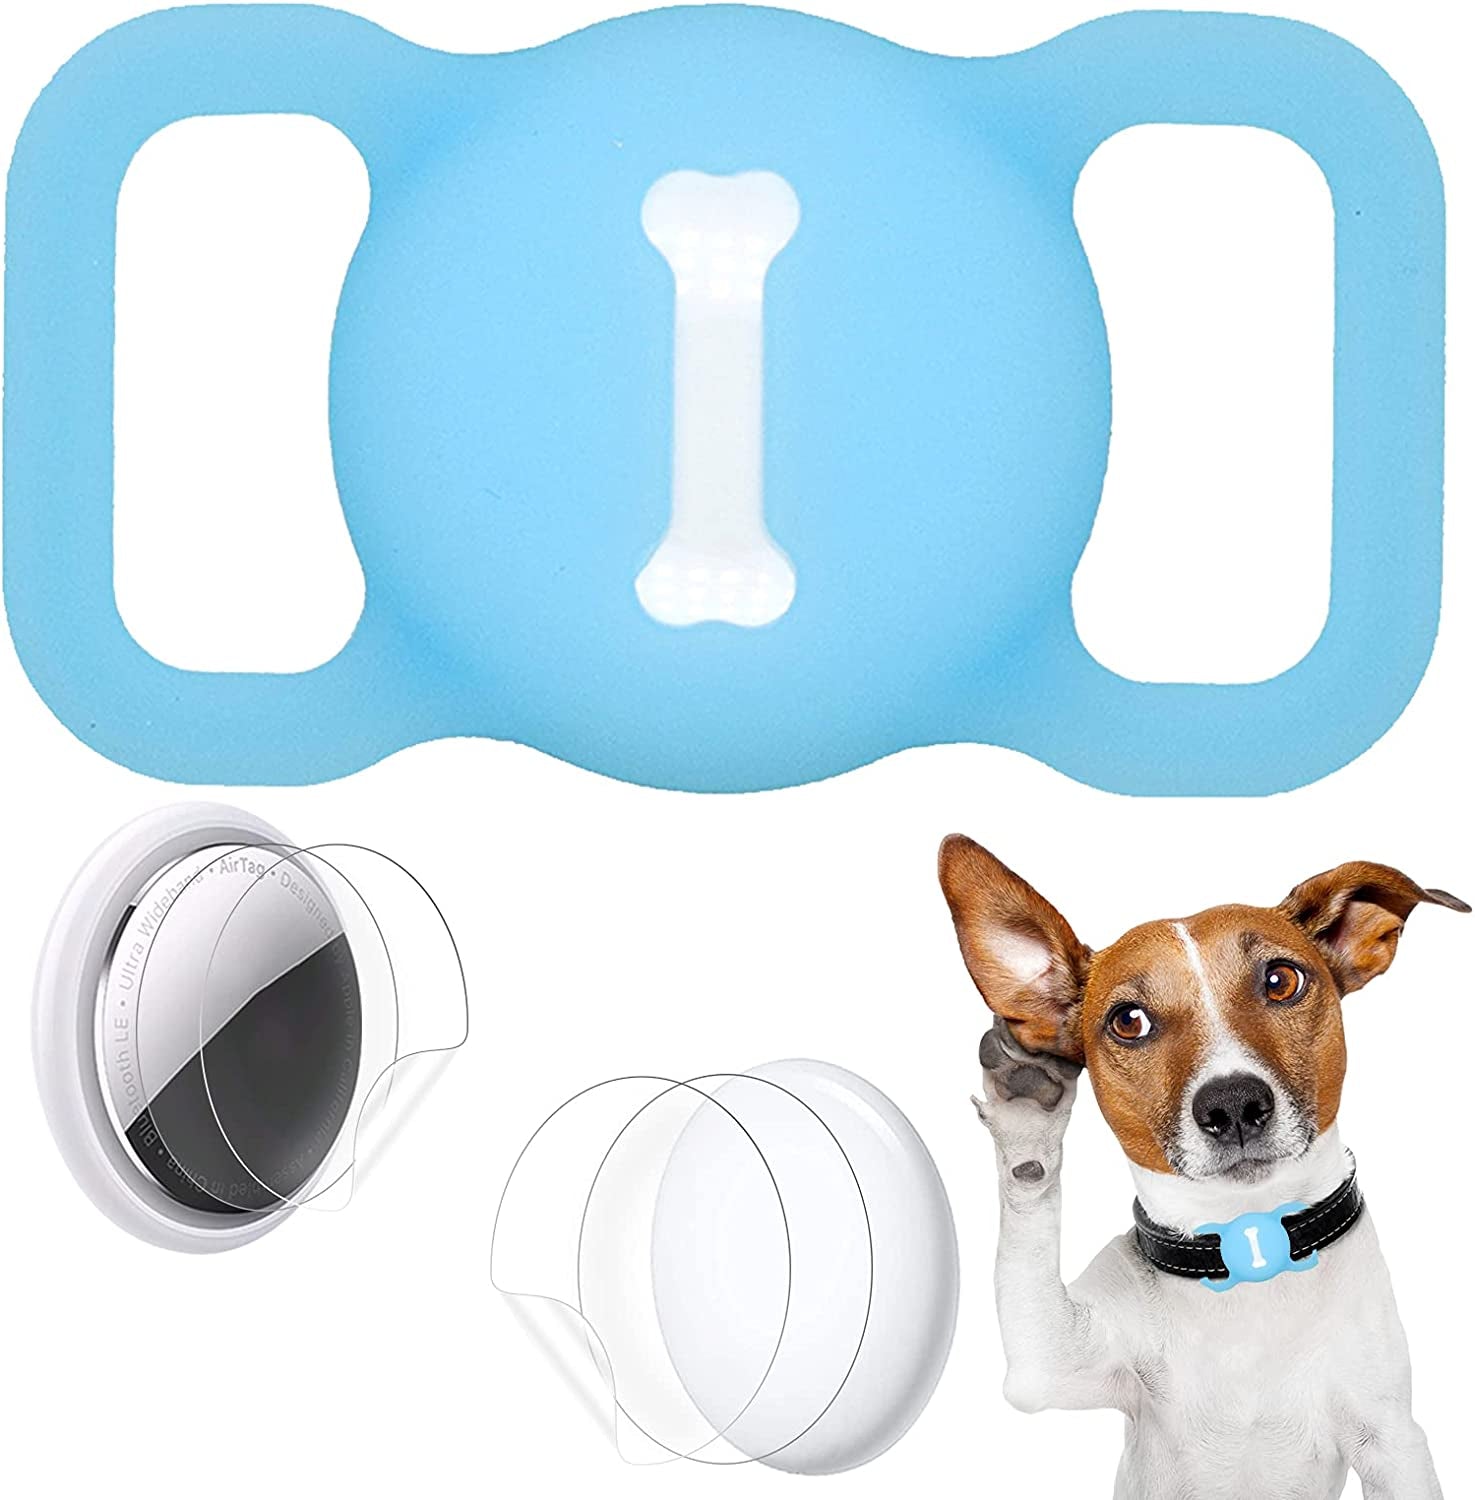 Protective Case Compatible for Apple Airtags for Dog Cat Collar Pet Loop Holder, Airtag Holder Accessories with Screen Protectors, Air Tag Silicone Cover for Pet Collar Electronics > GPS Accessories > GPS Cases Wustentre Luminous Blue  